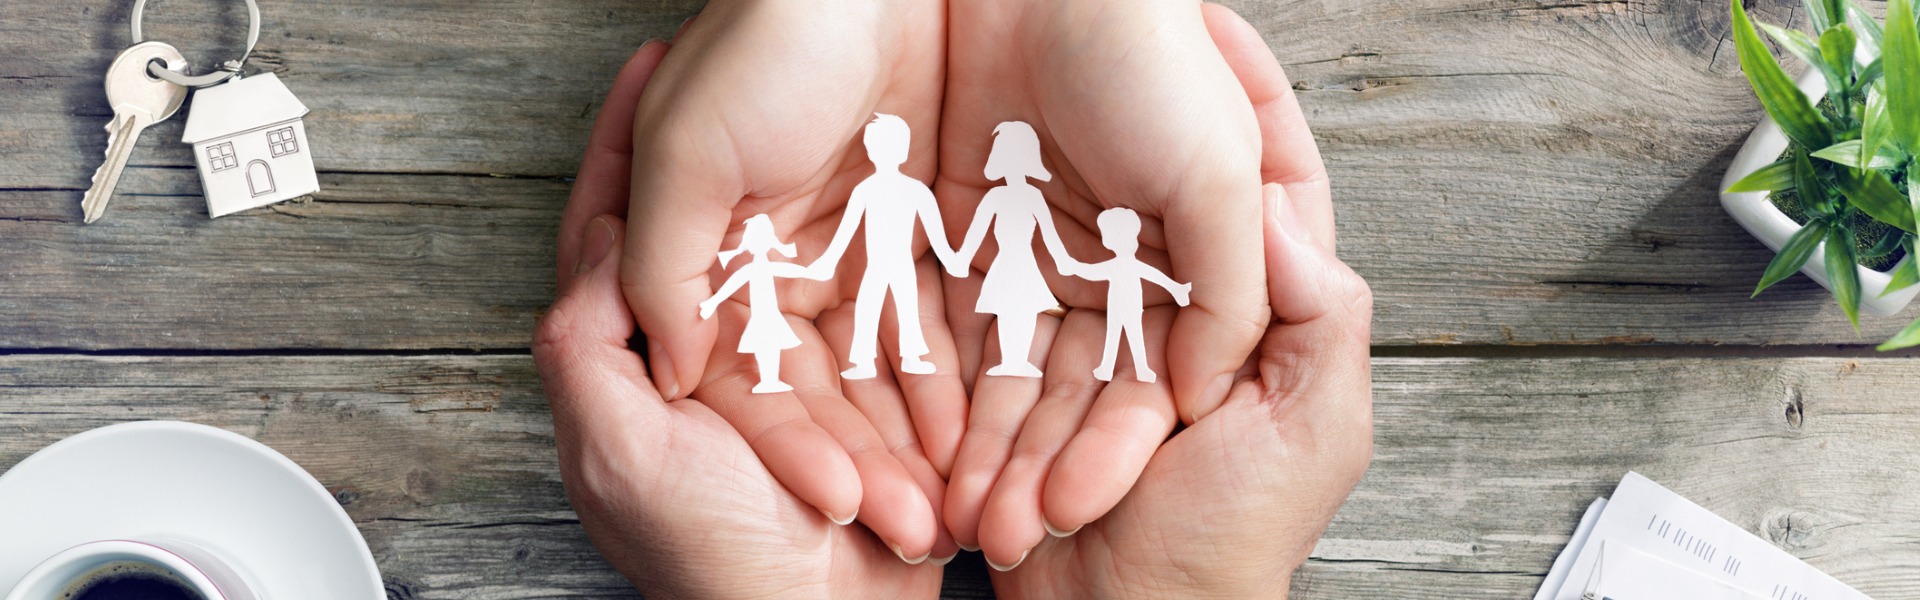 Two people's hands holding cutout image of family